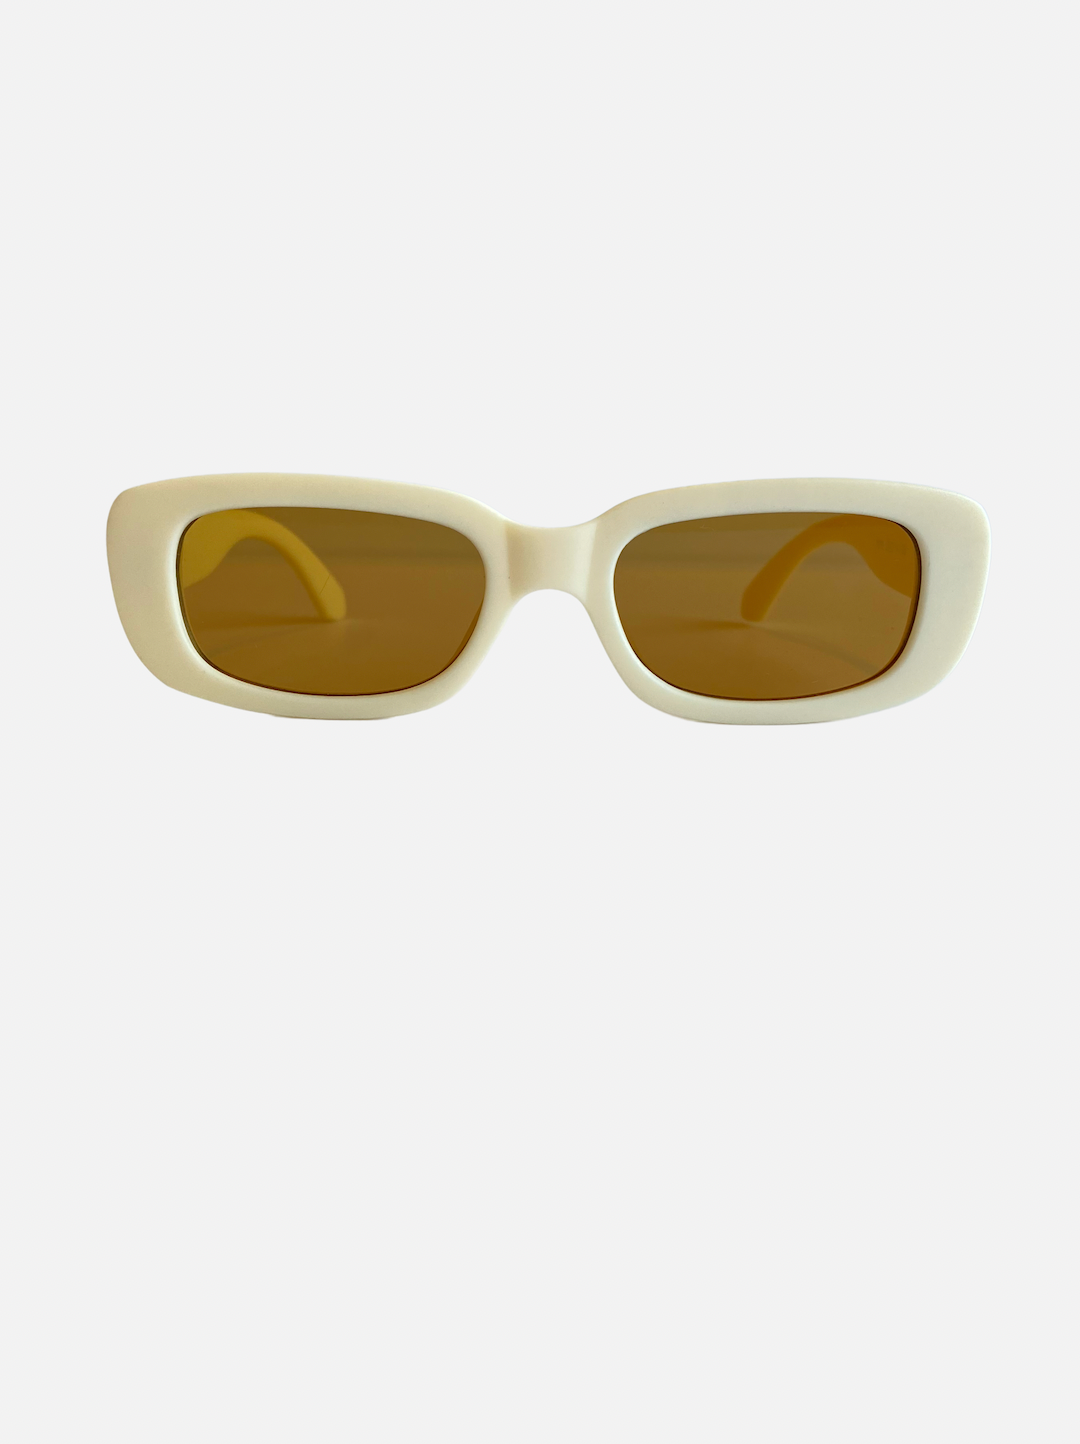 A pair of kids' sunglasses with brown lenses inside cream frames